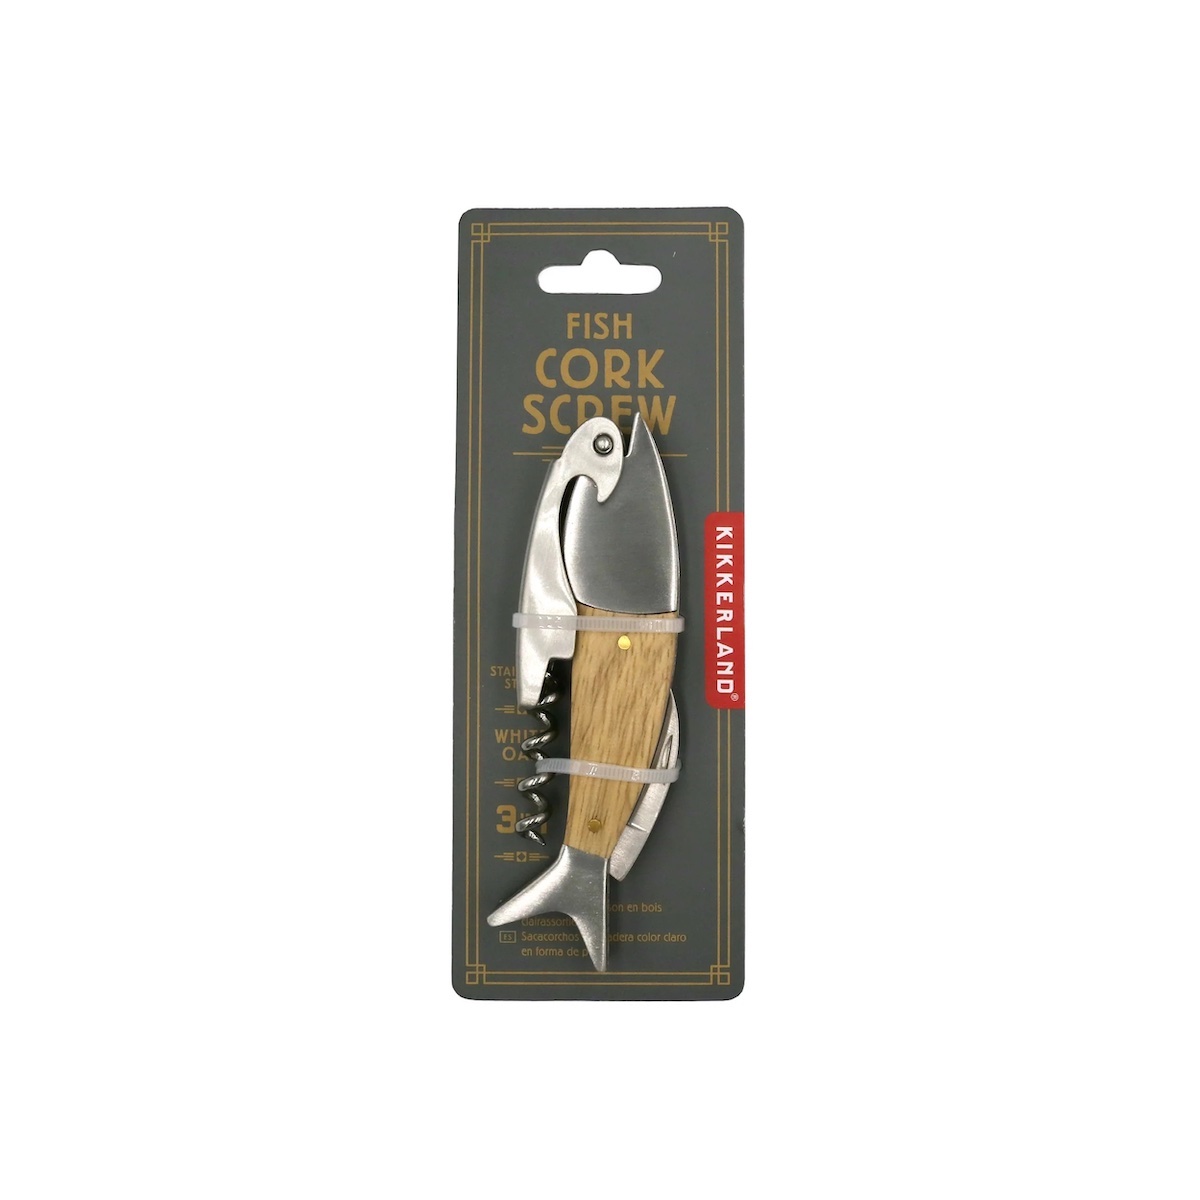 Kikkerland 3 in 1 Stainless Steel Fish Shaped Tool